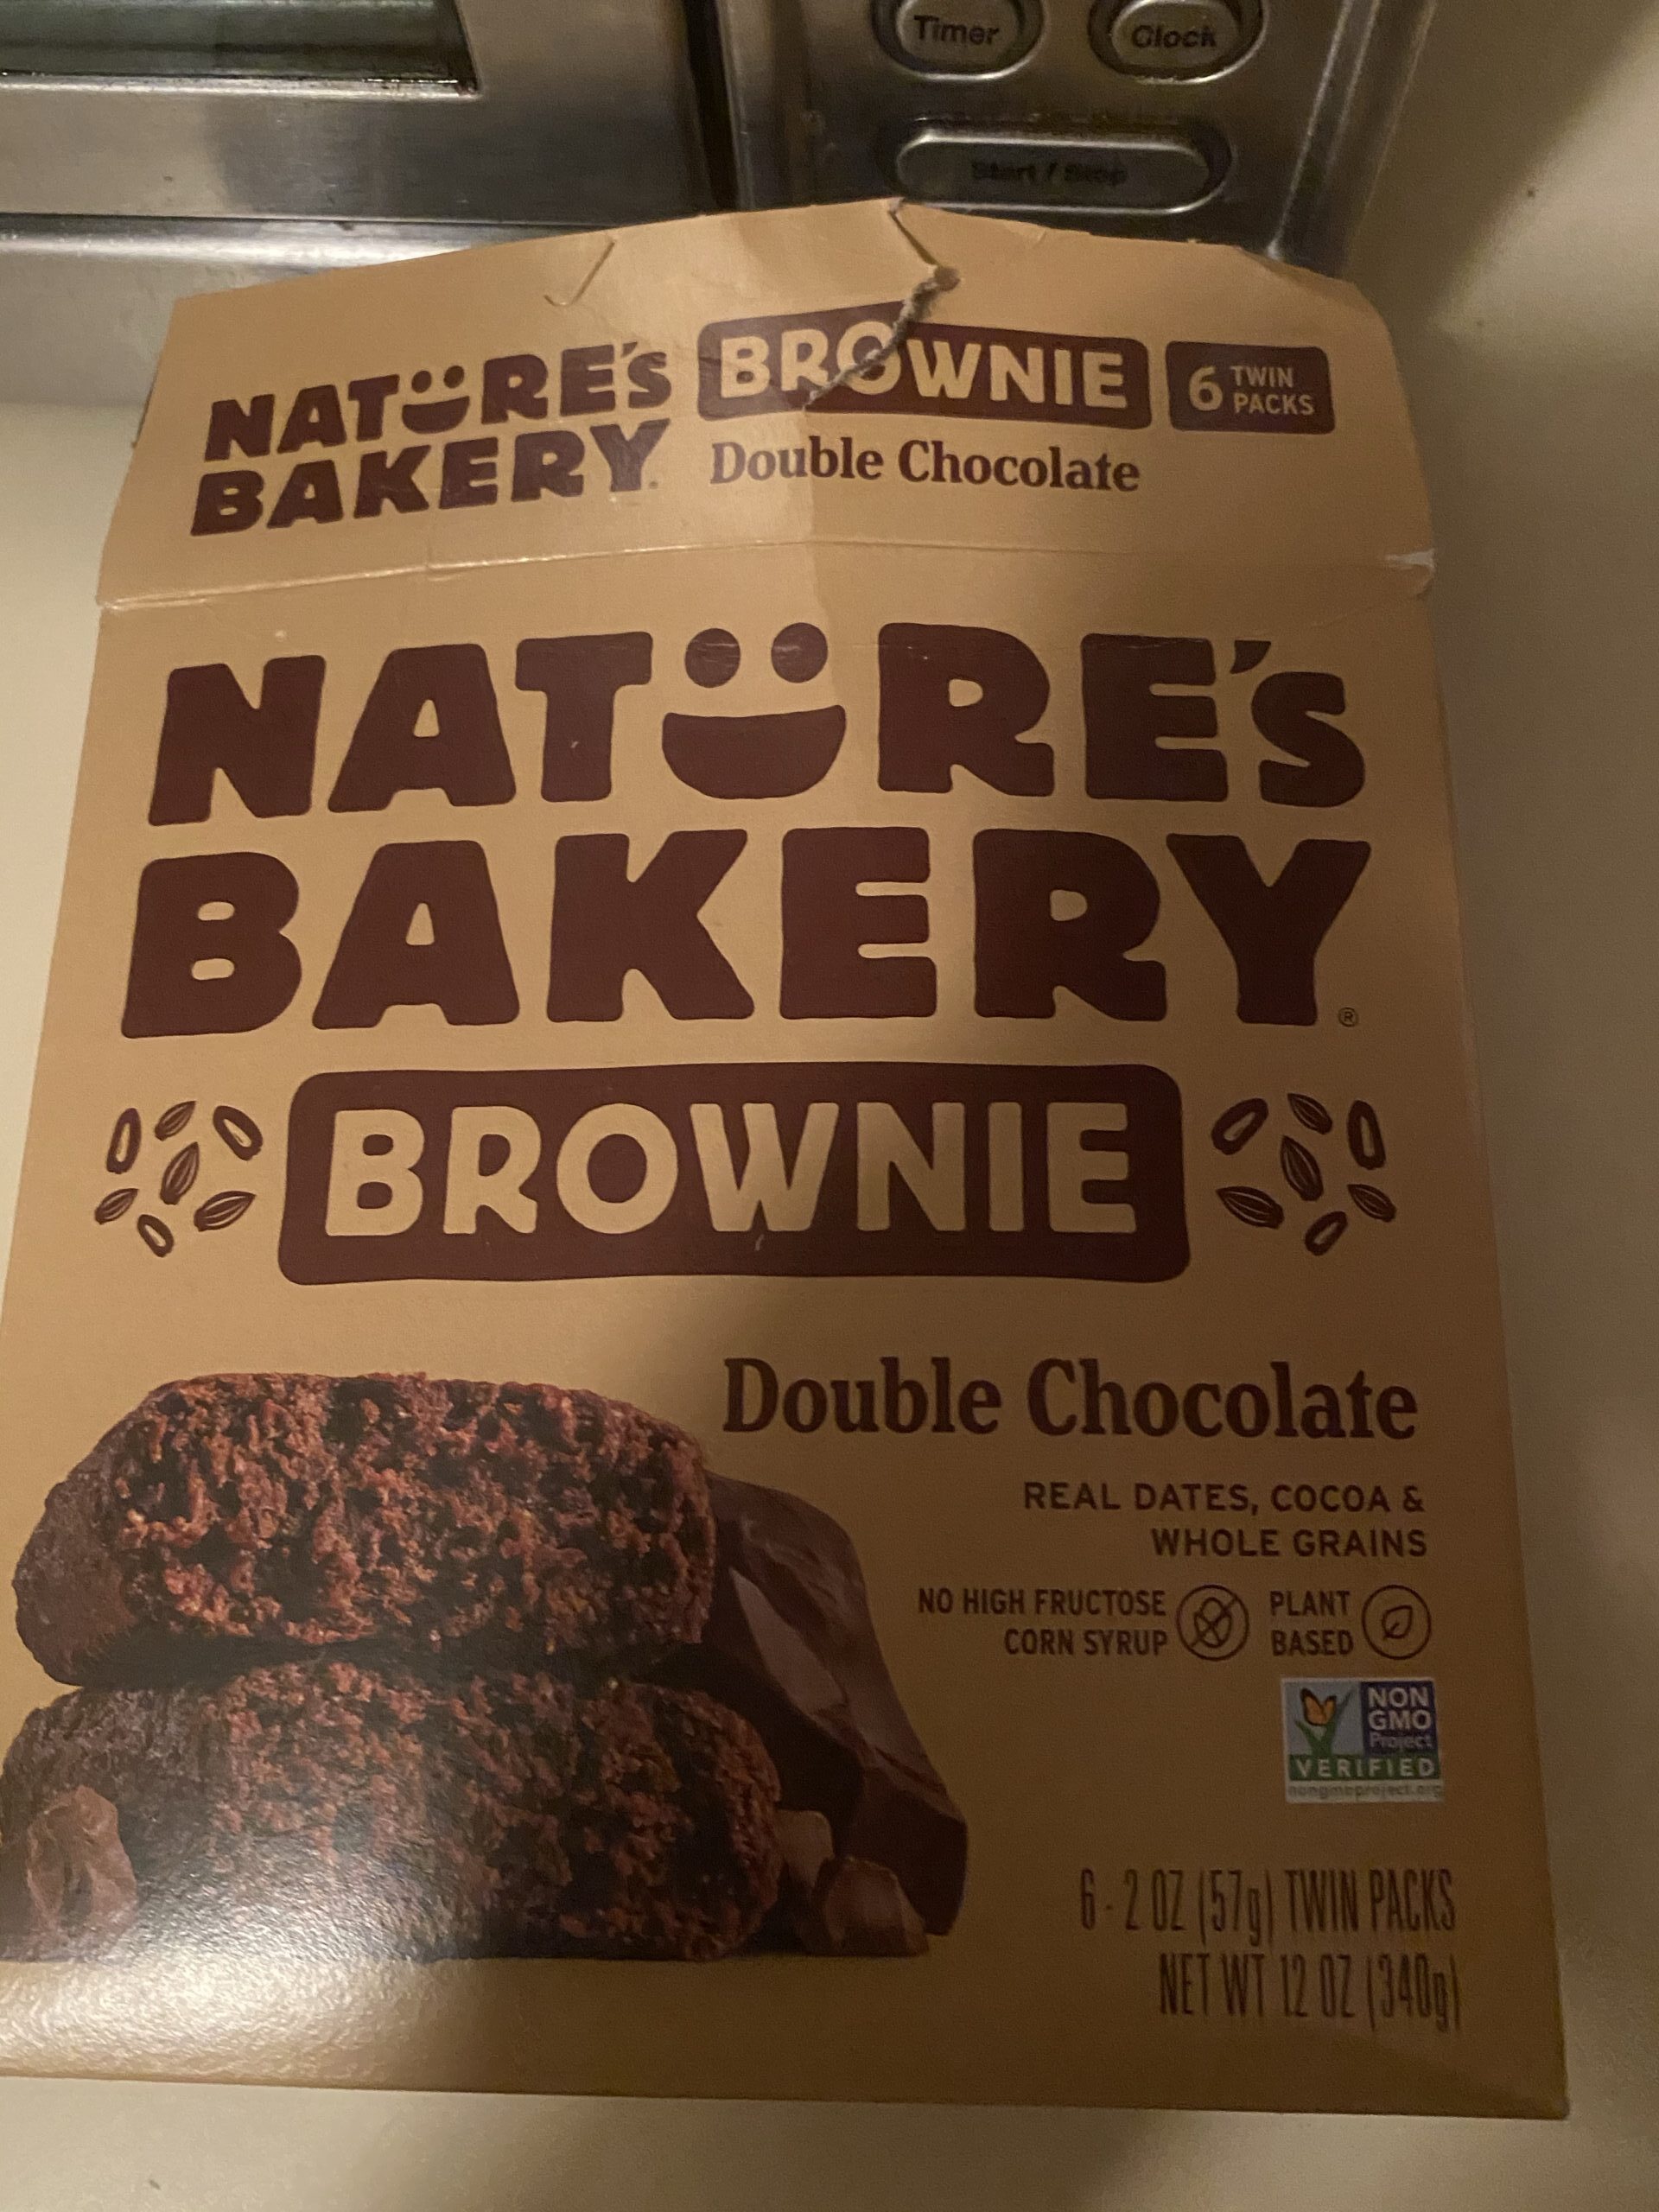 Natures Bakery Brownie bars